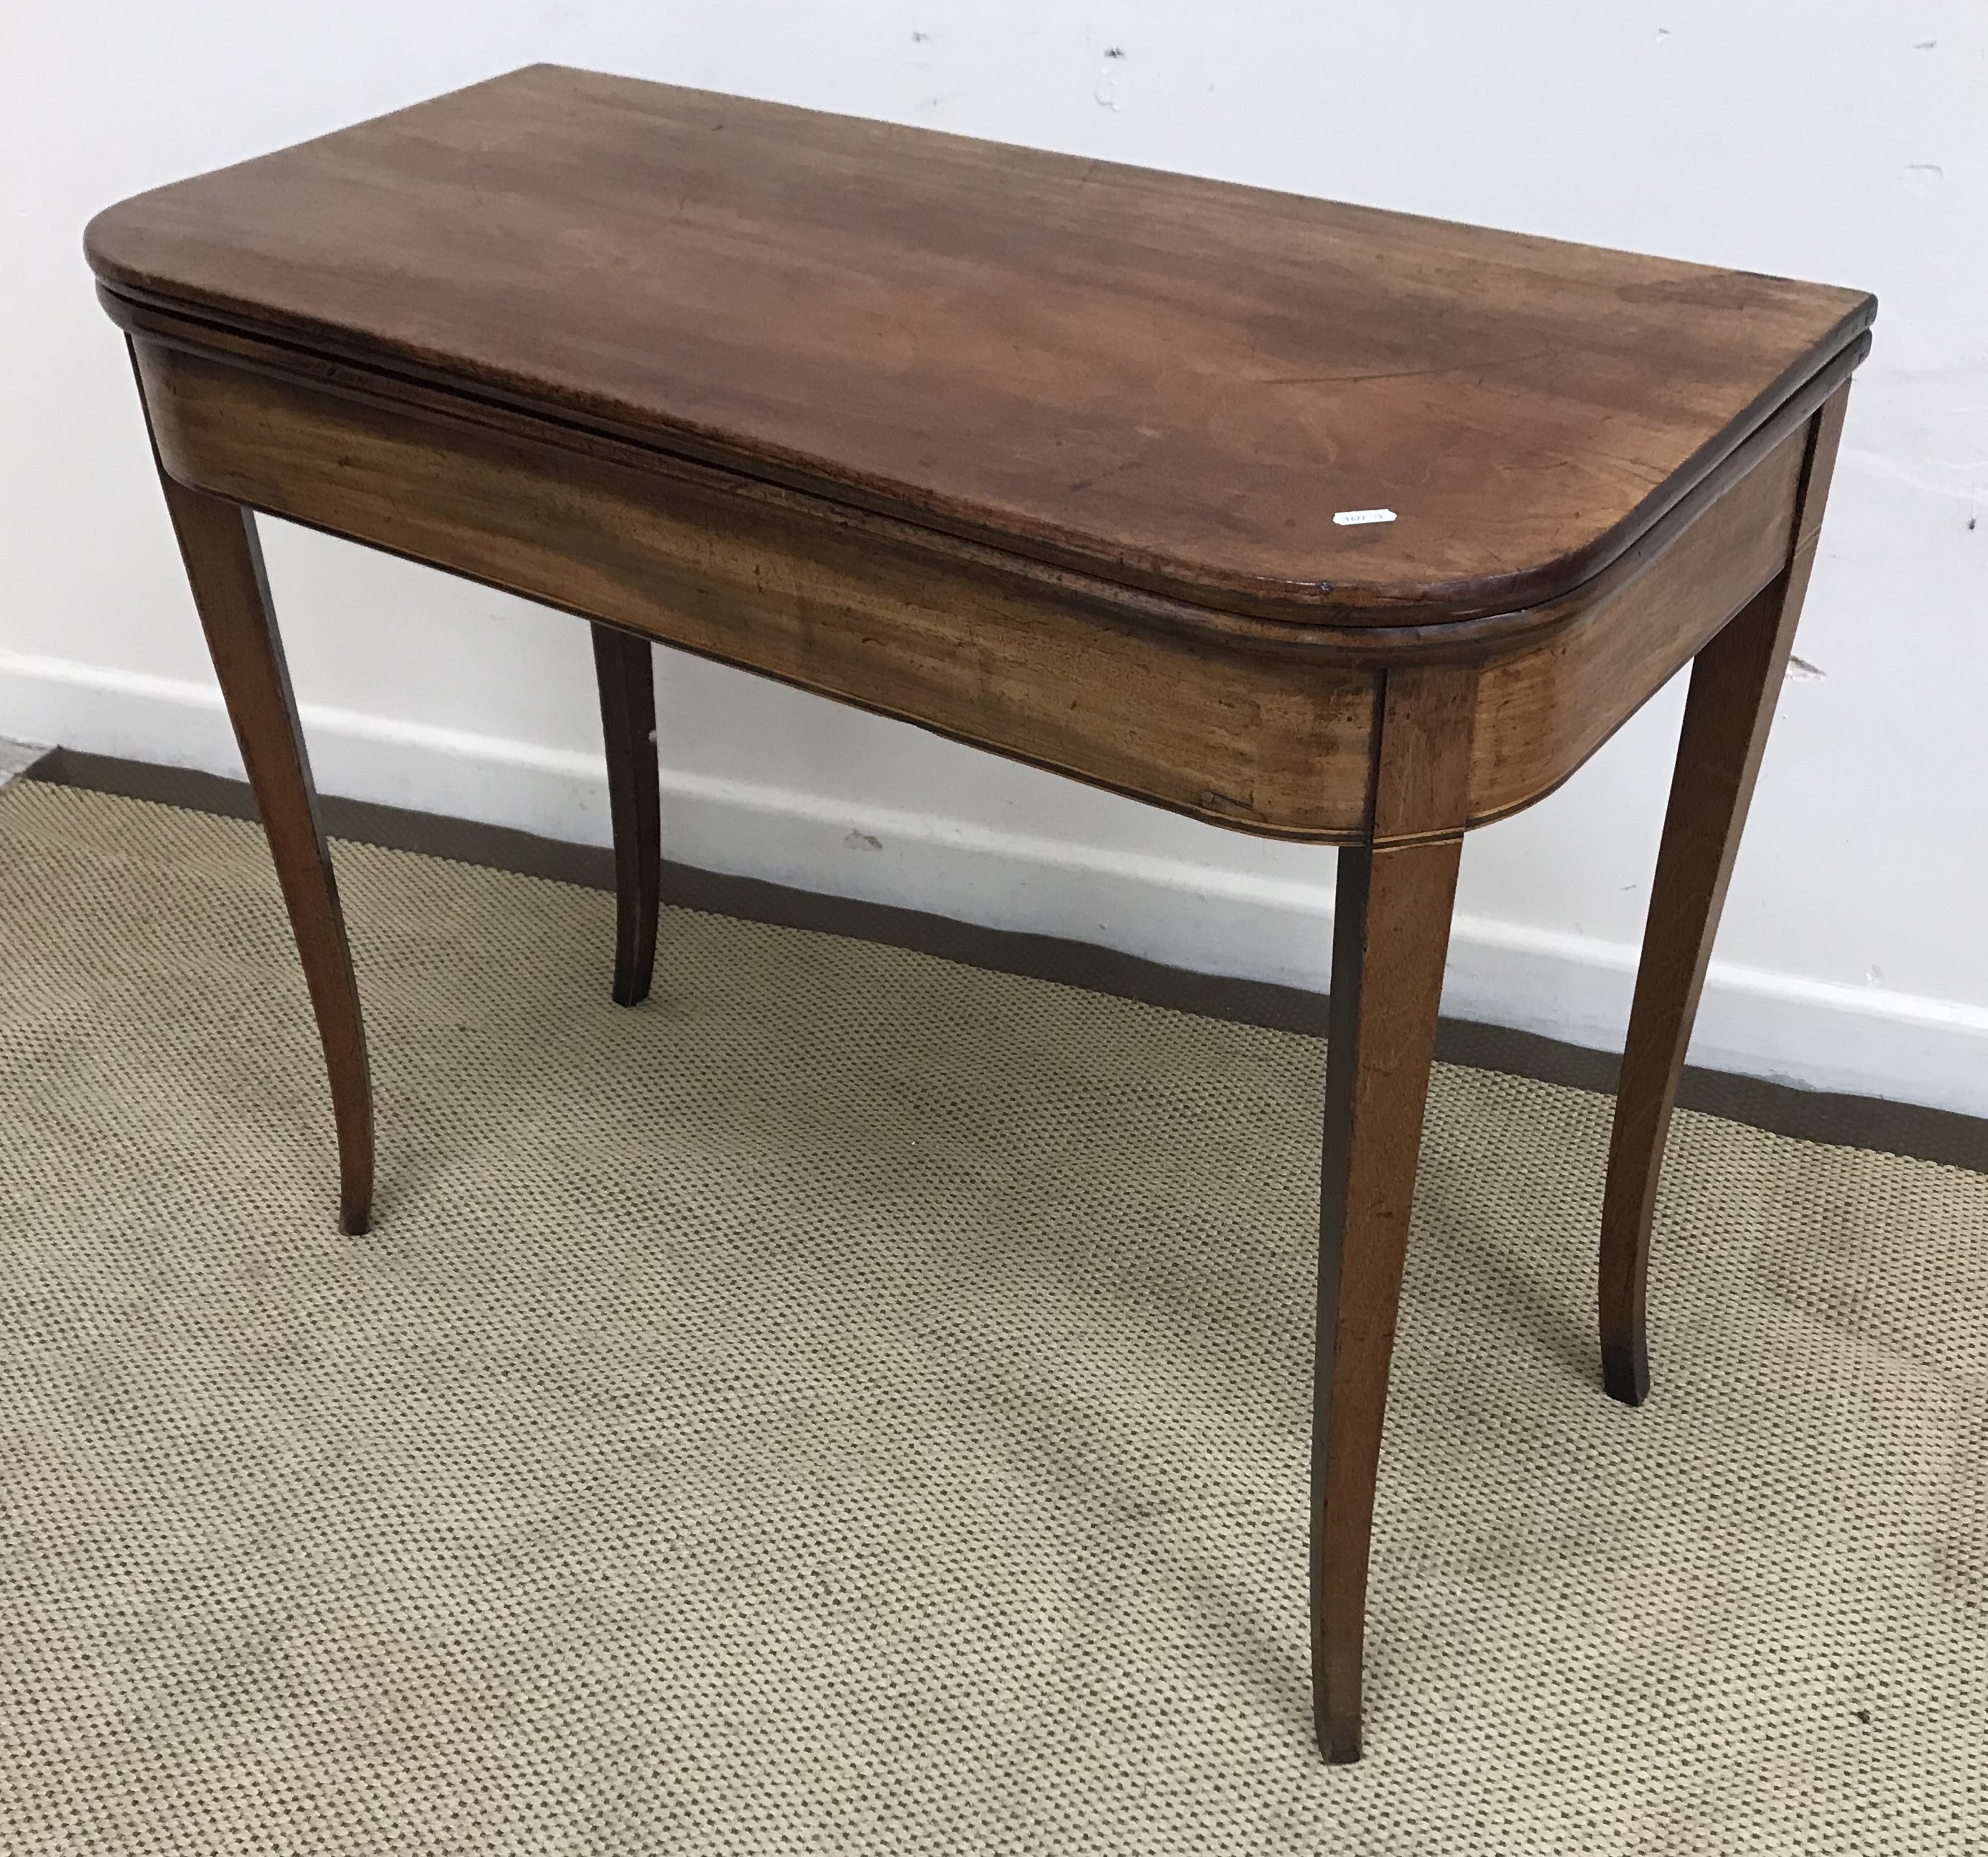 An early 19th Century mahogany rectangular drop leaf Pembroke table on square tapered legs with - Image 2 of 3